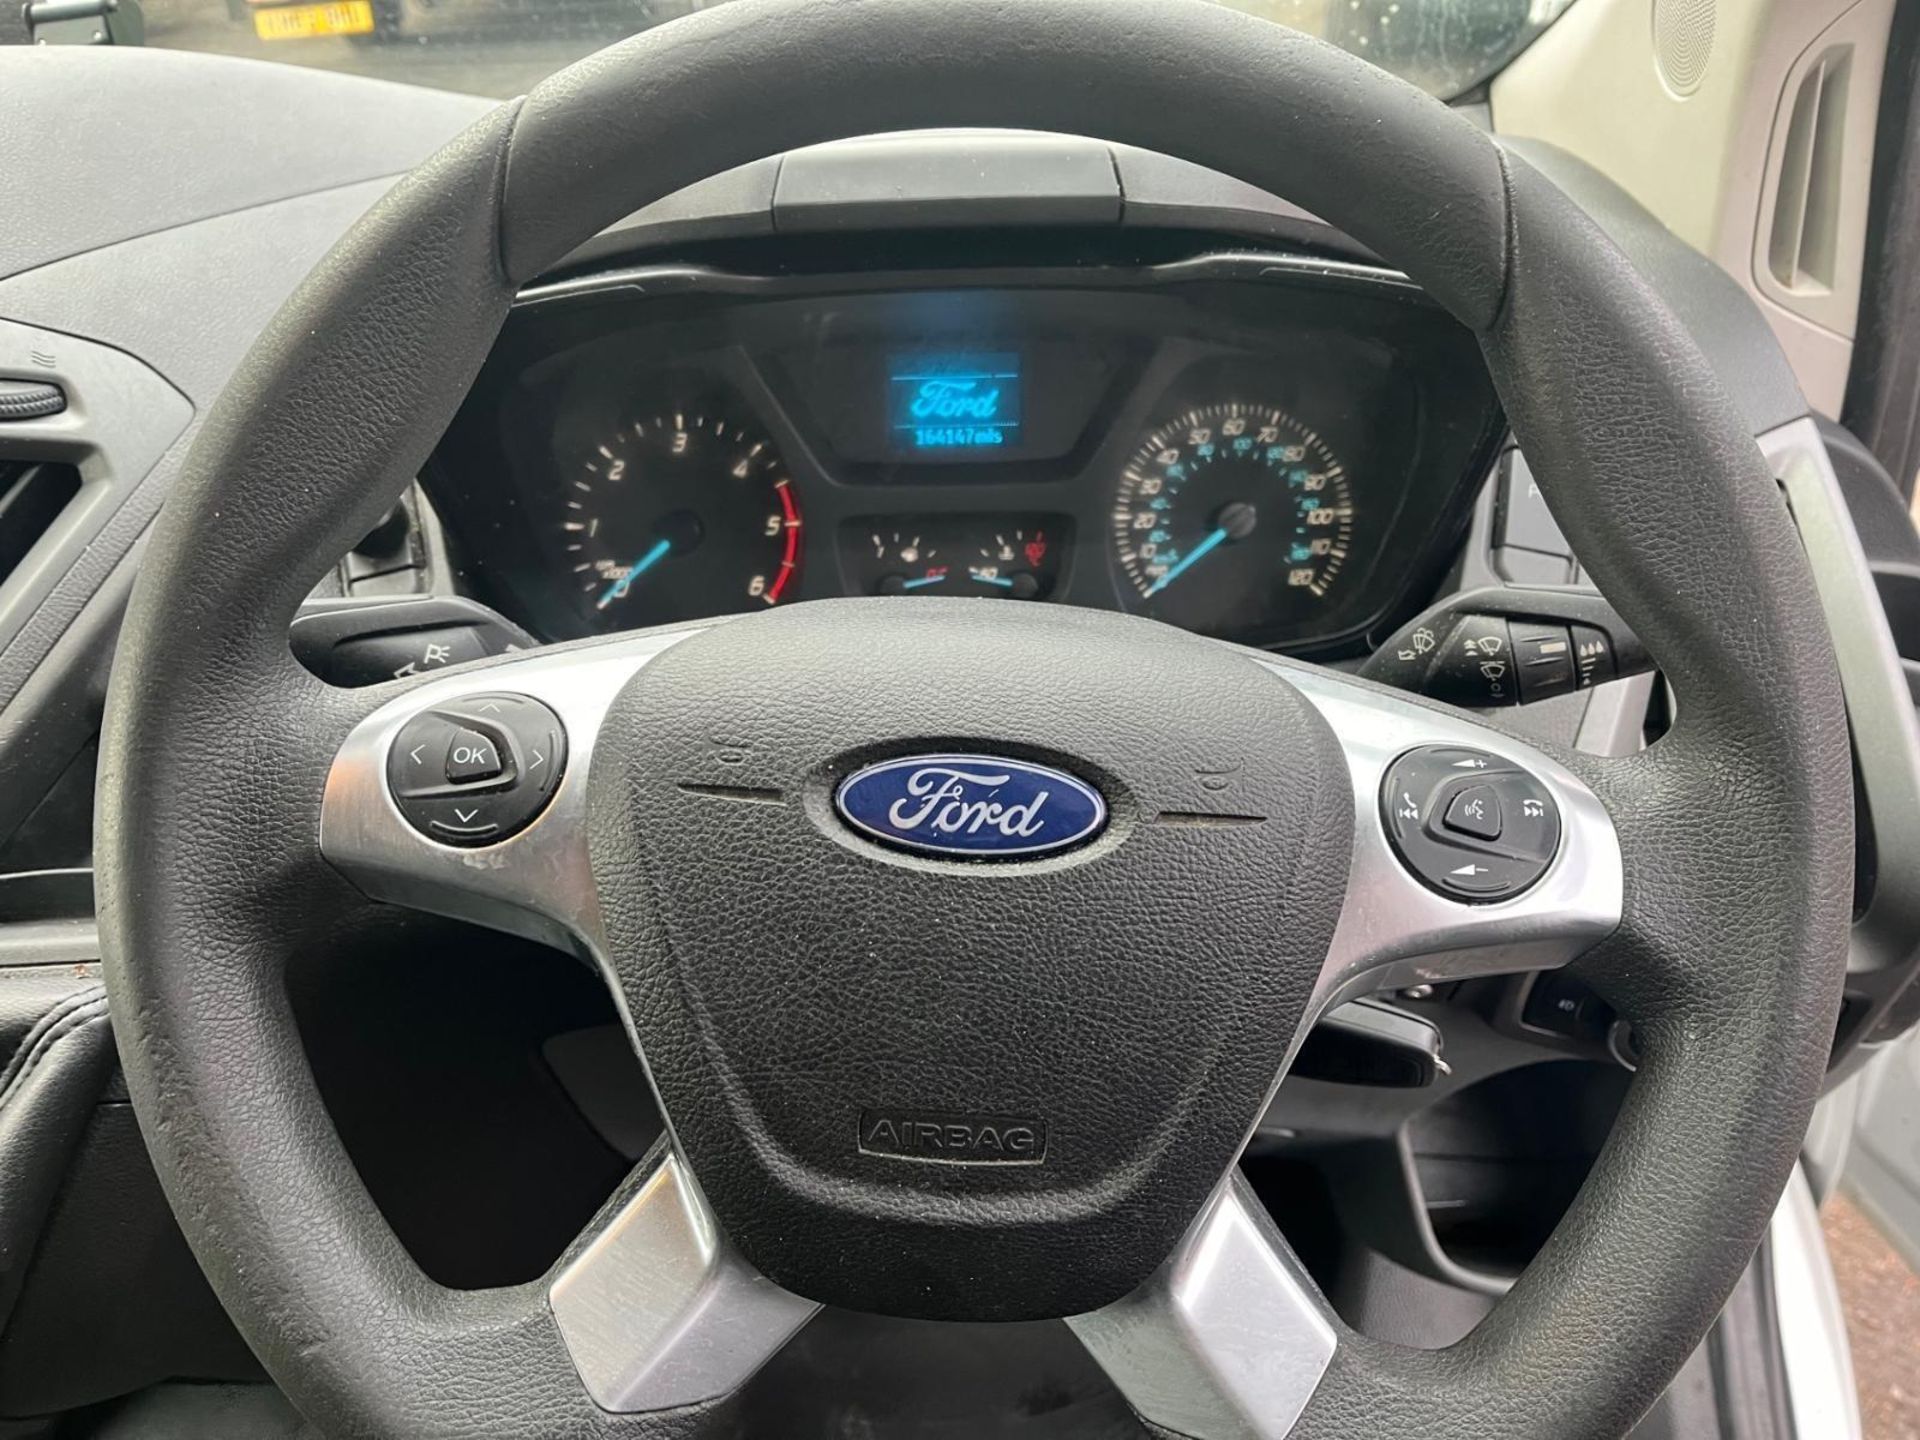 2018 FORD TRANSIT CUSTOM TDCI 130 L1 H1 SWB PANEL VAN - RELIABLE AND EFFICIENT BUSINESS COMPANION - Image 10 of 15